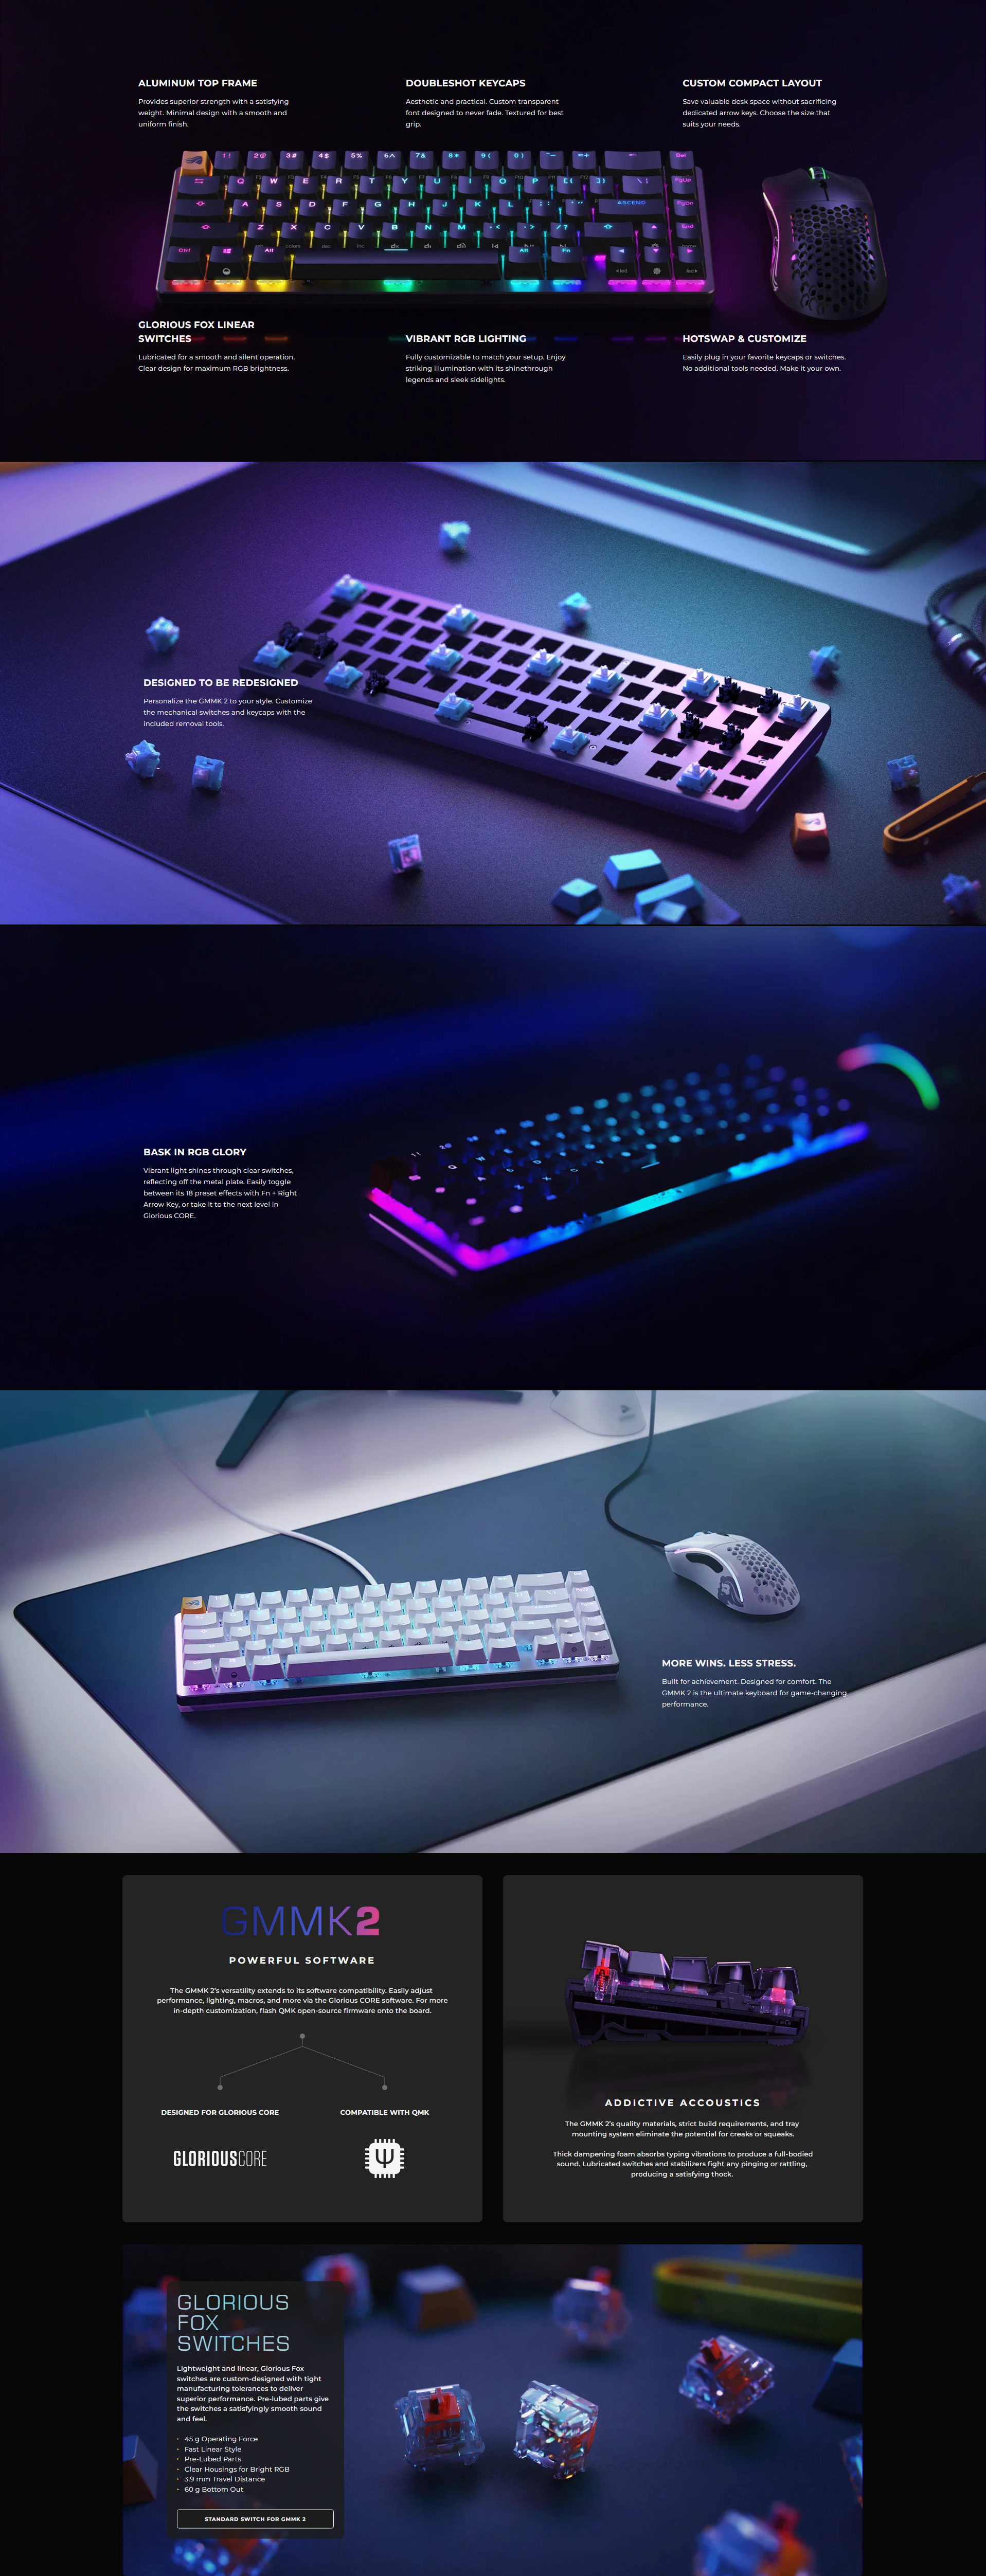 A large marketing image providing additional information about the product Glorious GMMK 2 Compact Mechanical Keyboard - Black (Prebuilt) - Additional alt info not provided